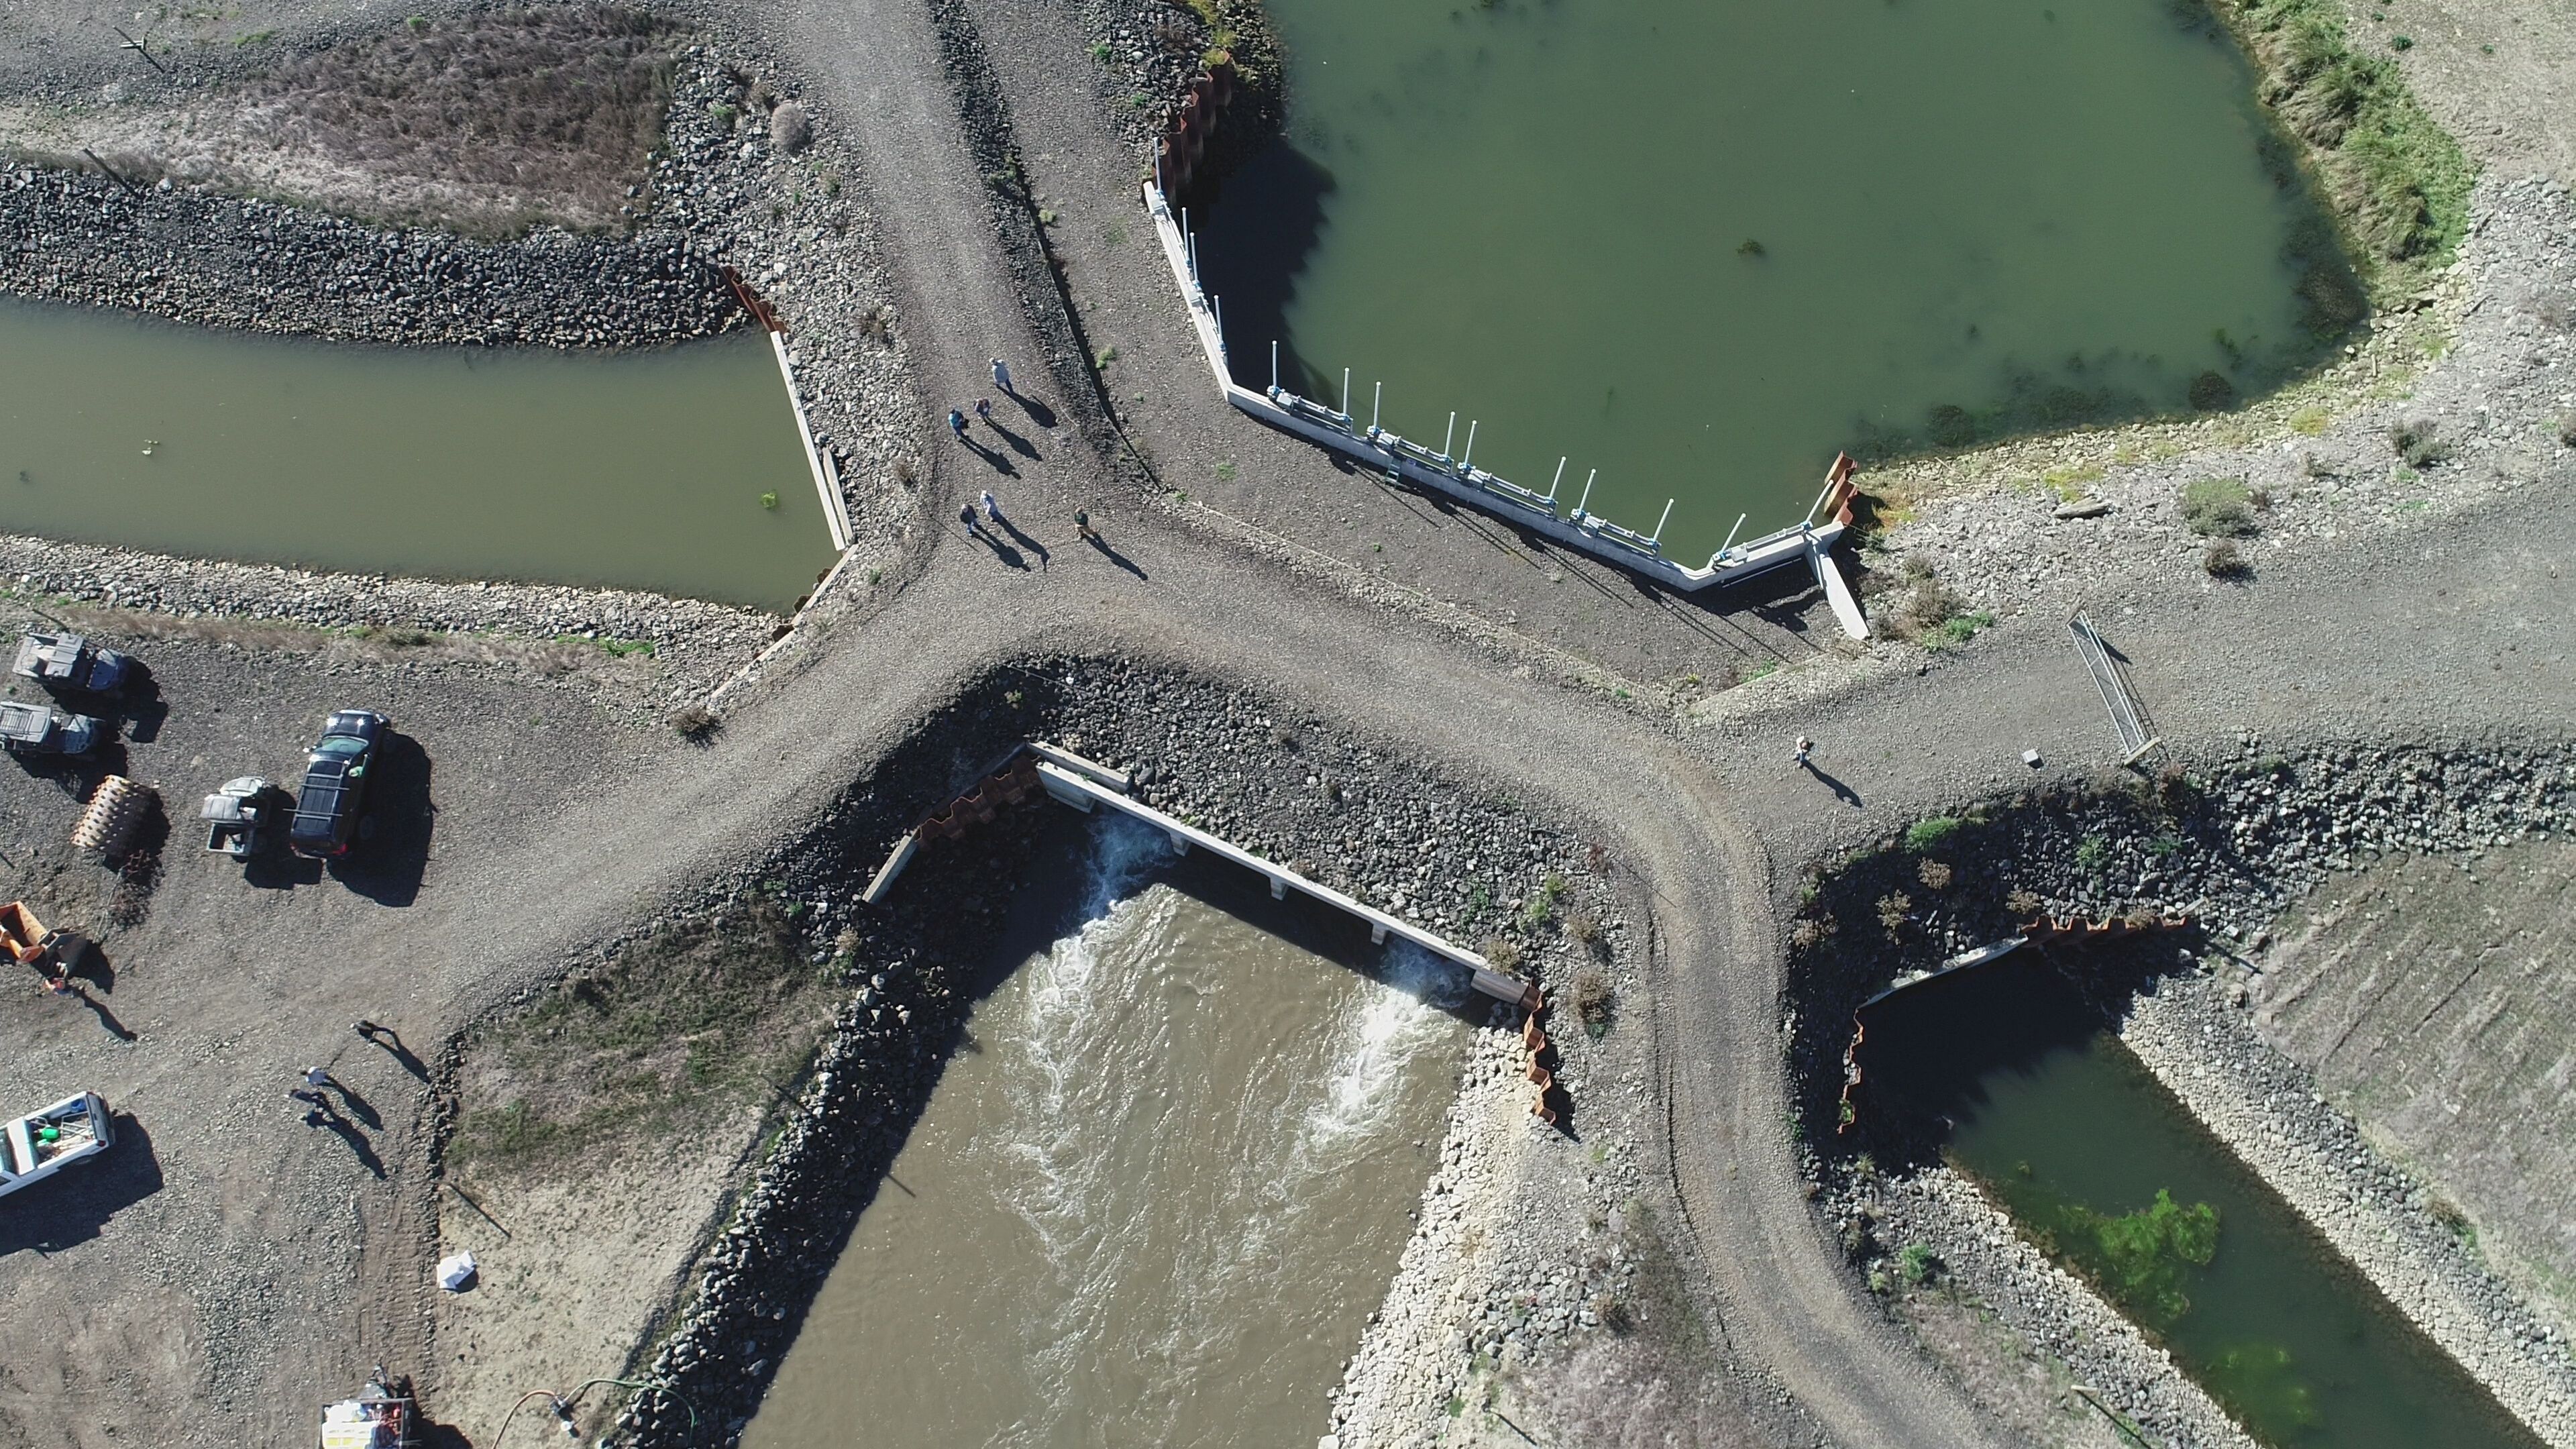 Aerial view looking straight down on gravel roads and parking areas, with several channels of water coming together, and water flowing through a white tide gate in the middle.